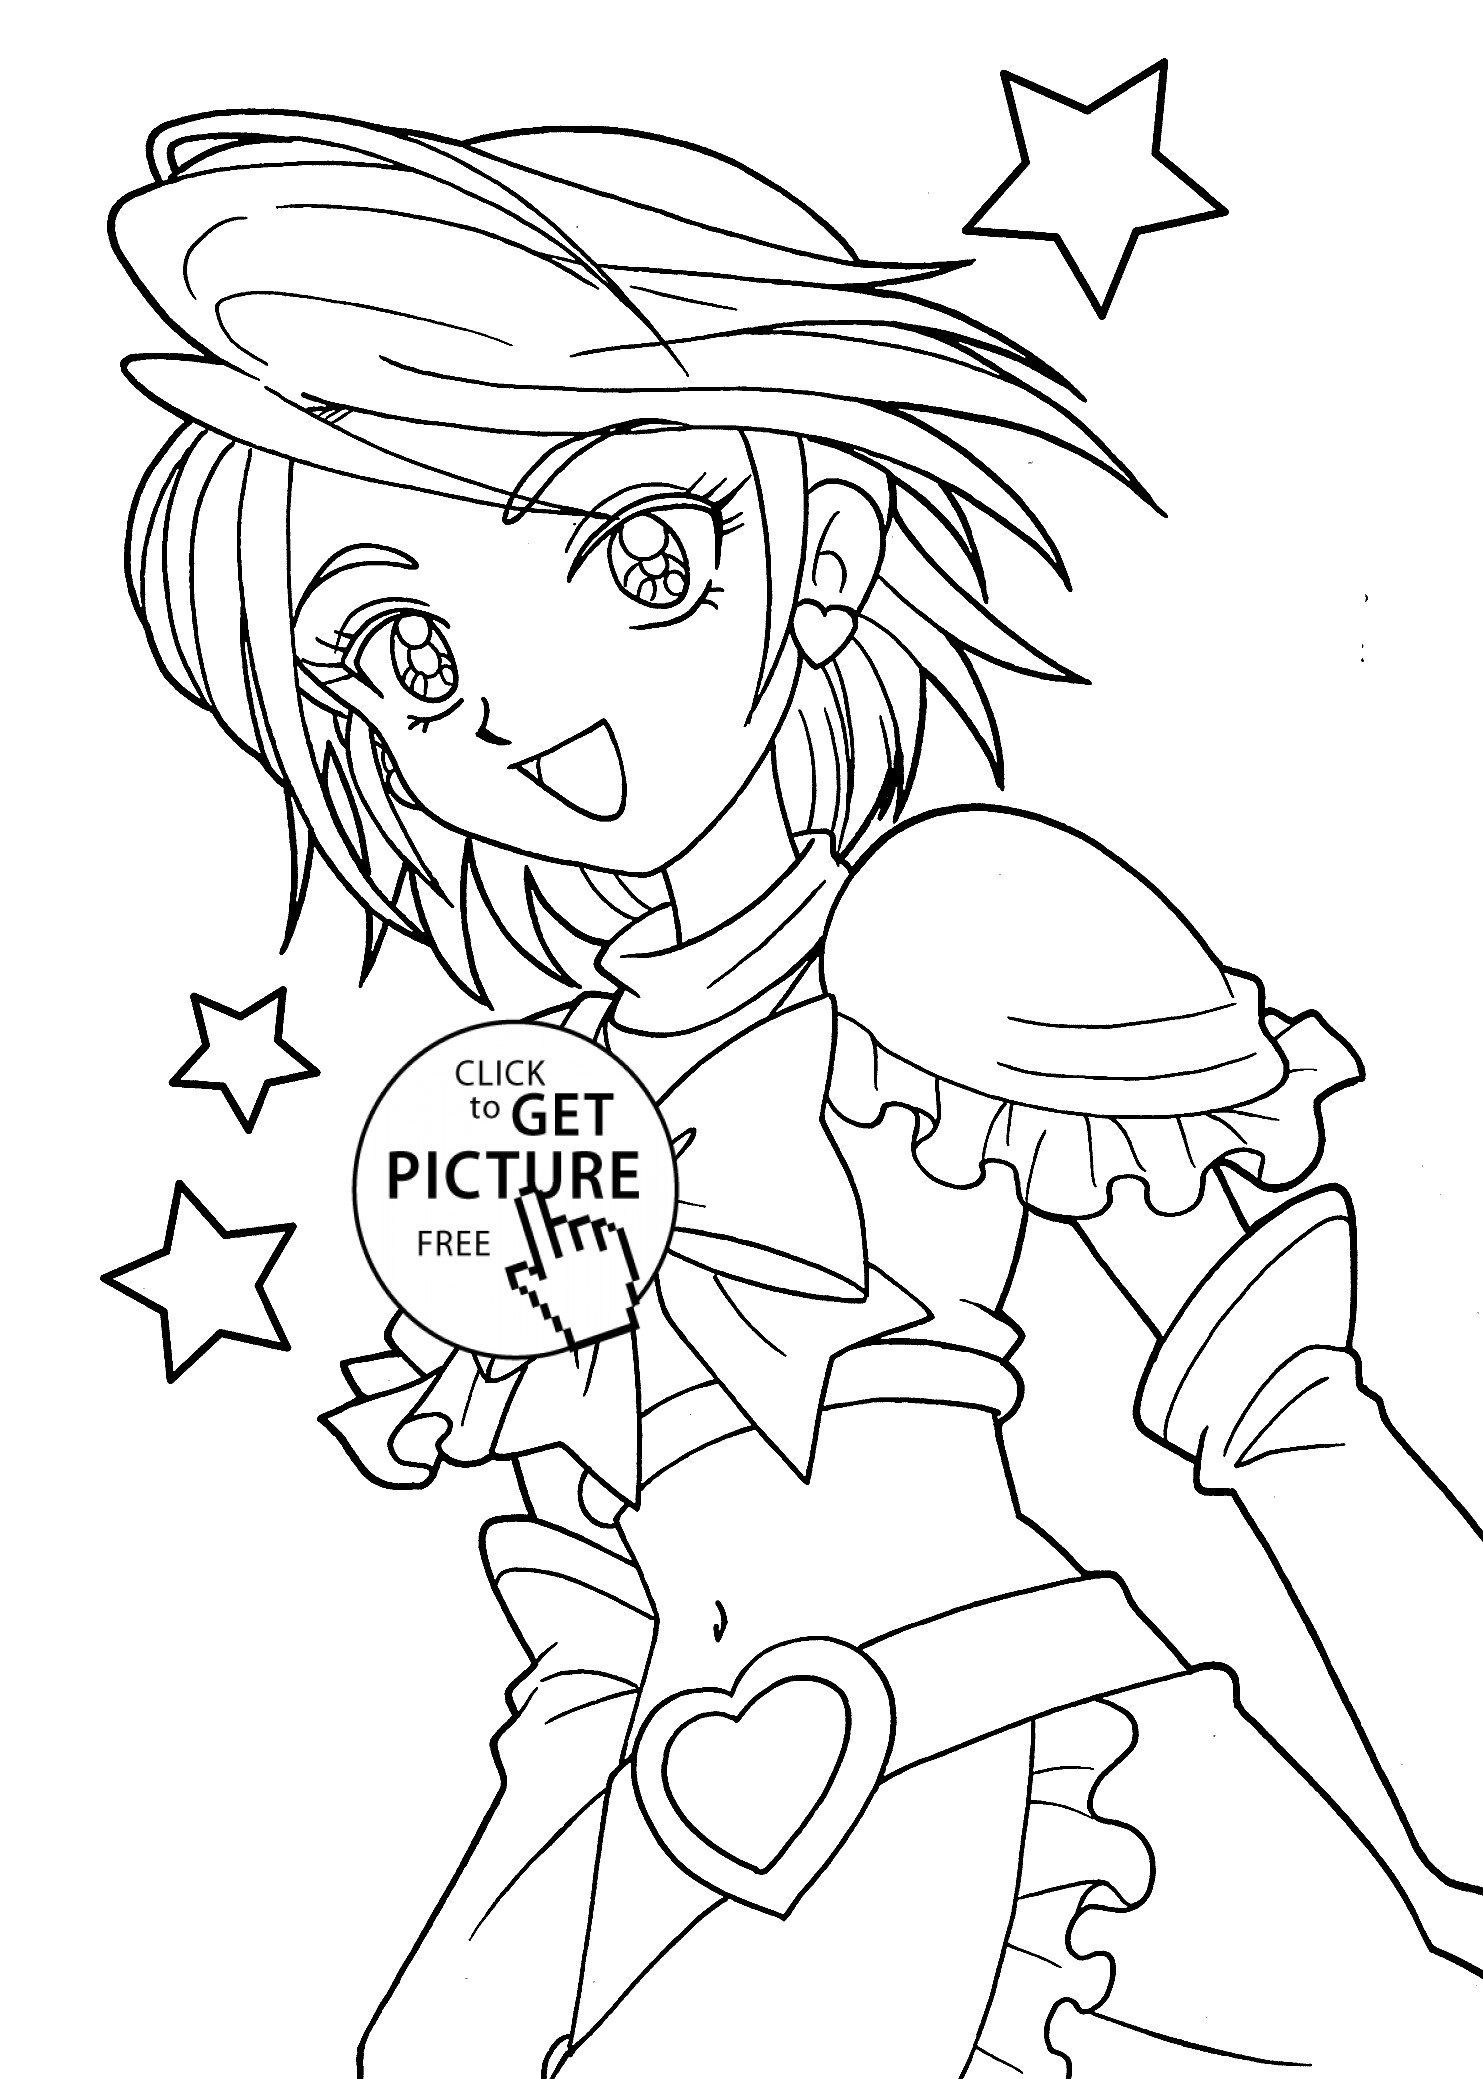 Printable Coloring Pages Girls
 Pretty cure coloring pages for girls printable free